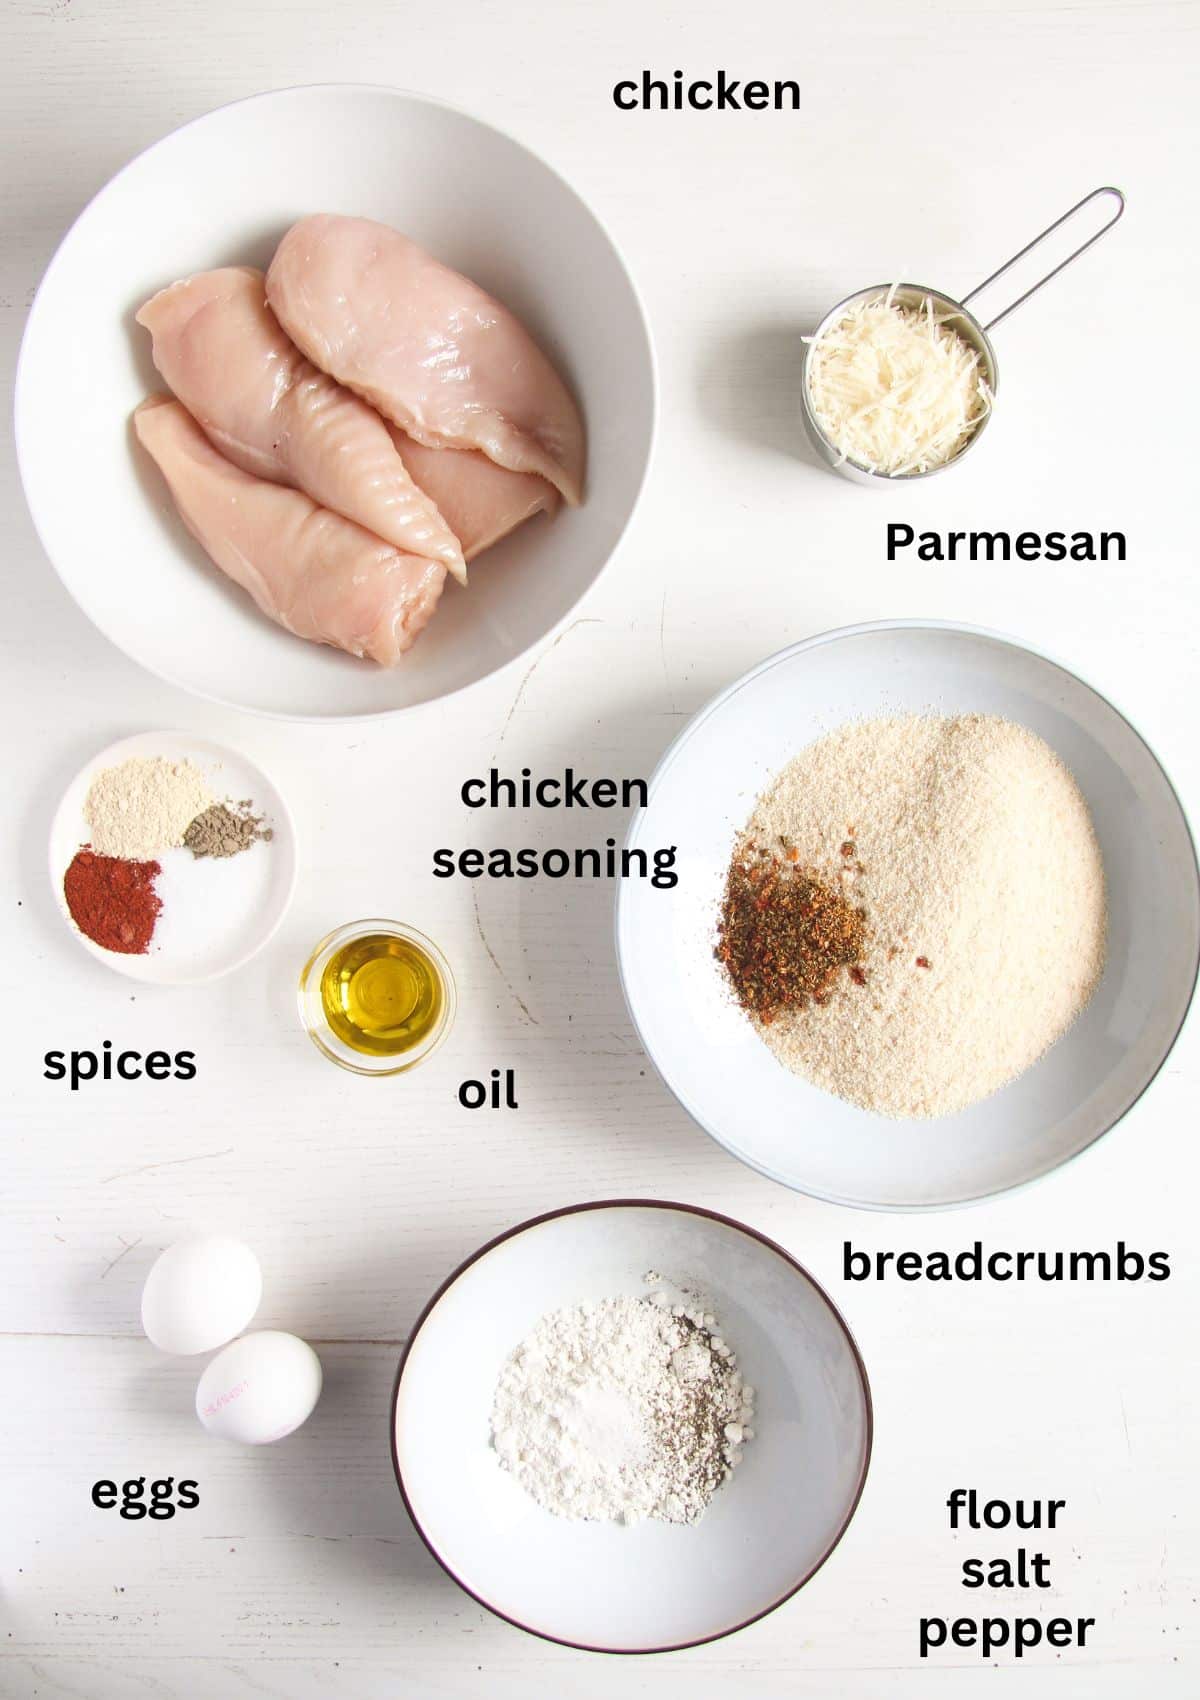 listed ingredients for baking chicken cutlets in the oven.